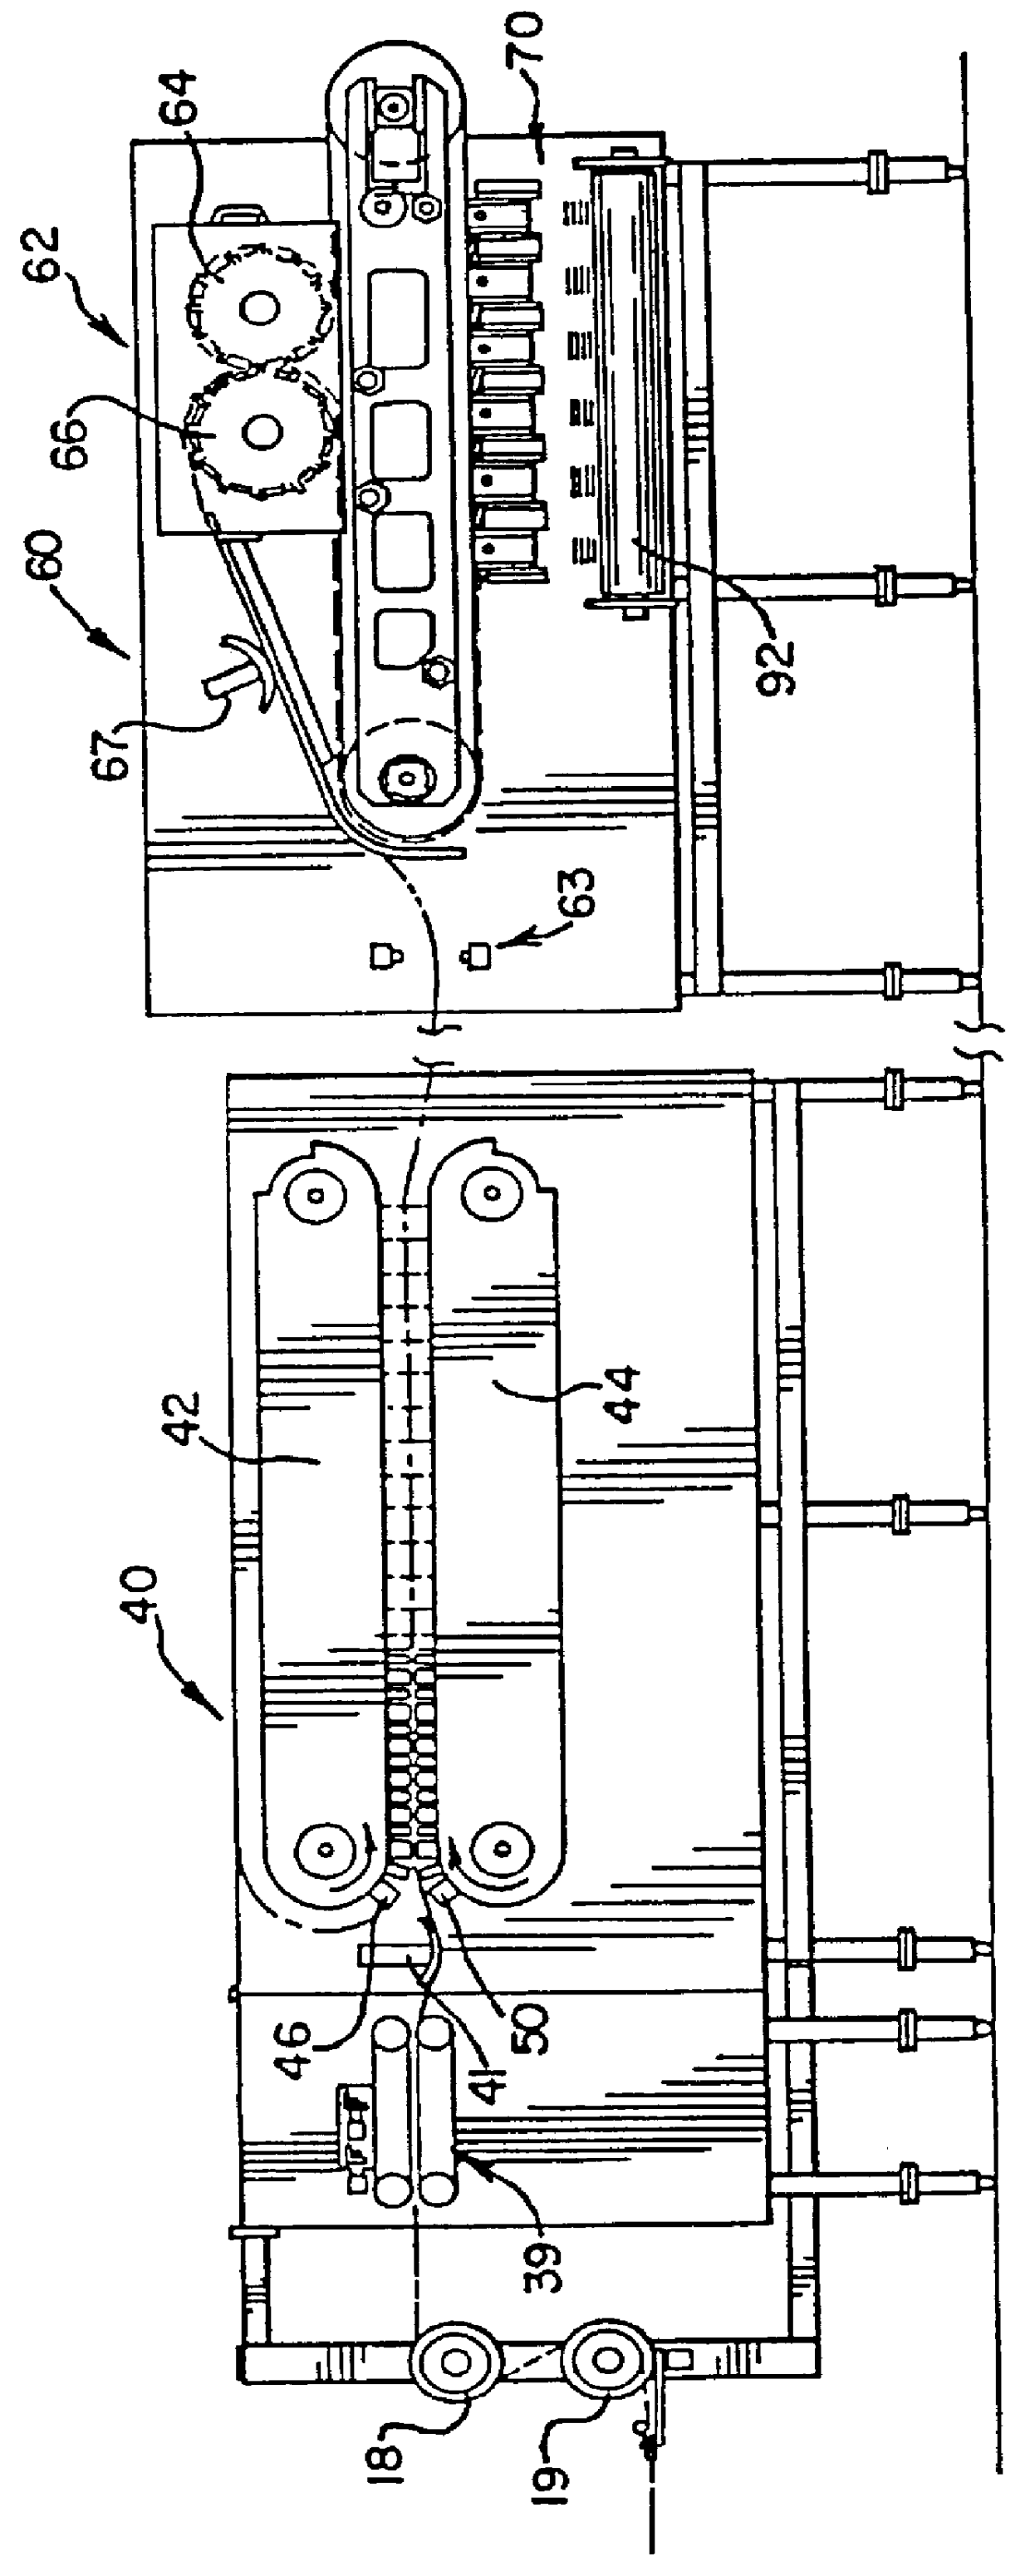 Method and apparatus for forming and hermetically sealing slices of food items